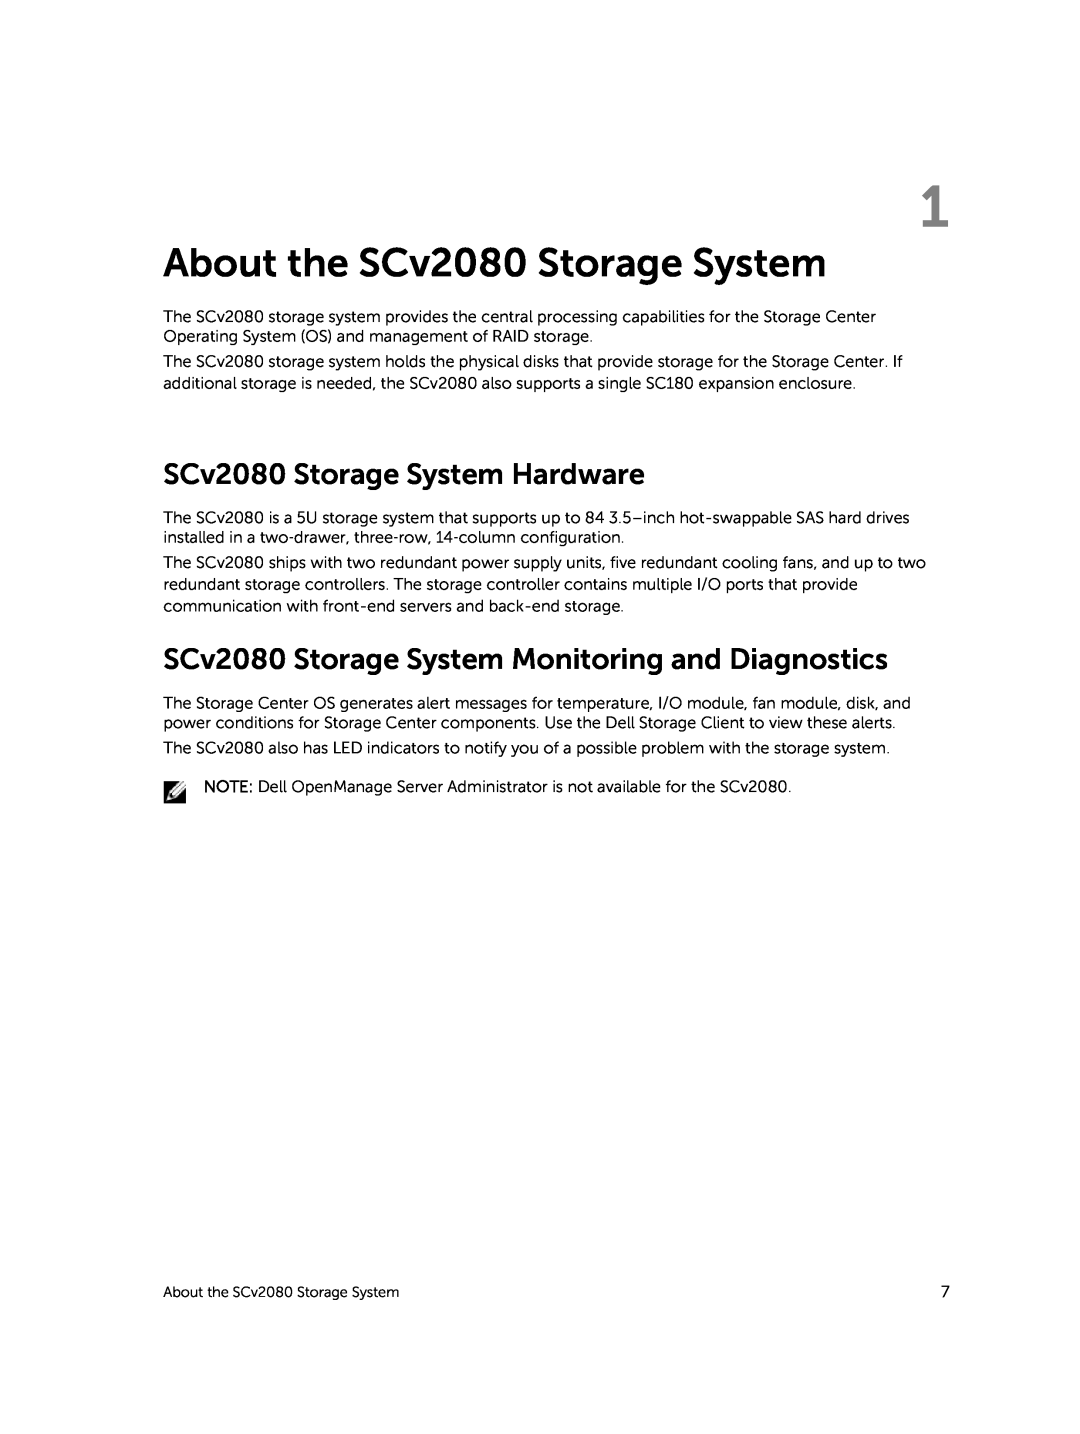 Dell E11J001 owner manual About the SCv2080 Storage System, SCv2080 Storage System Hardware 